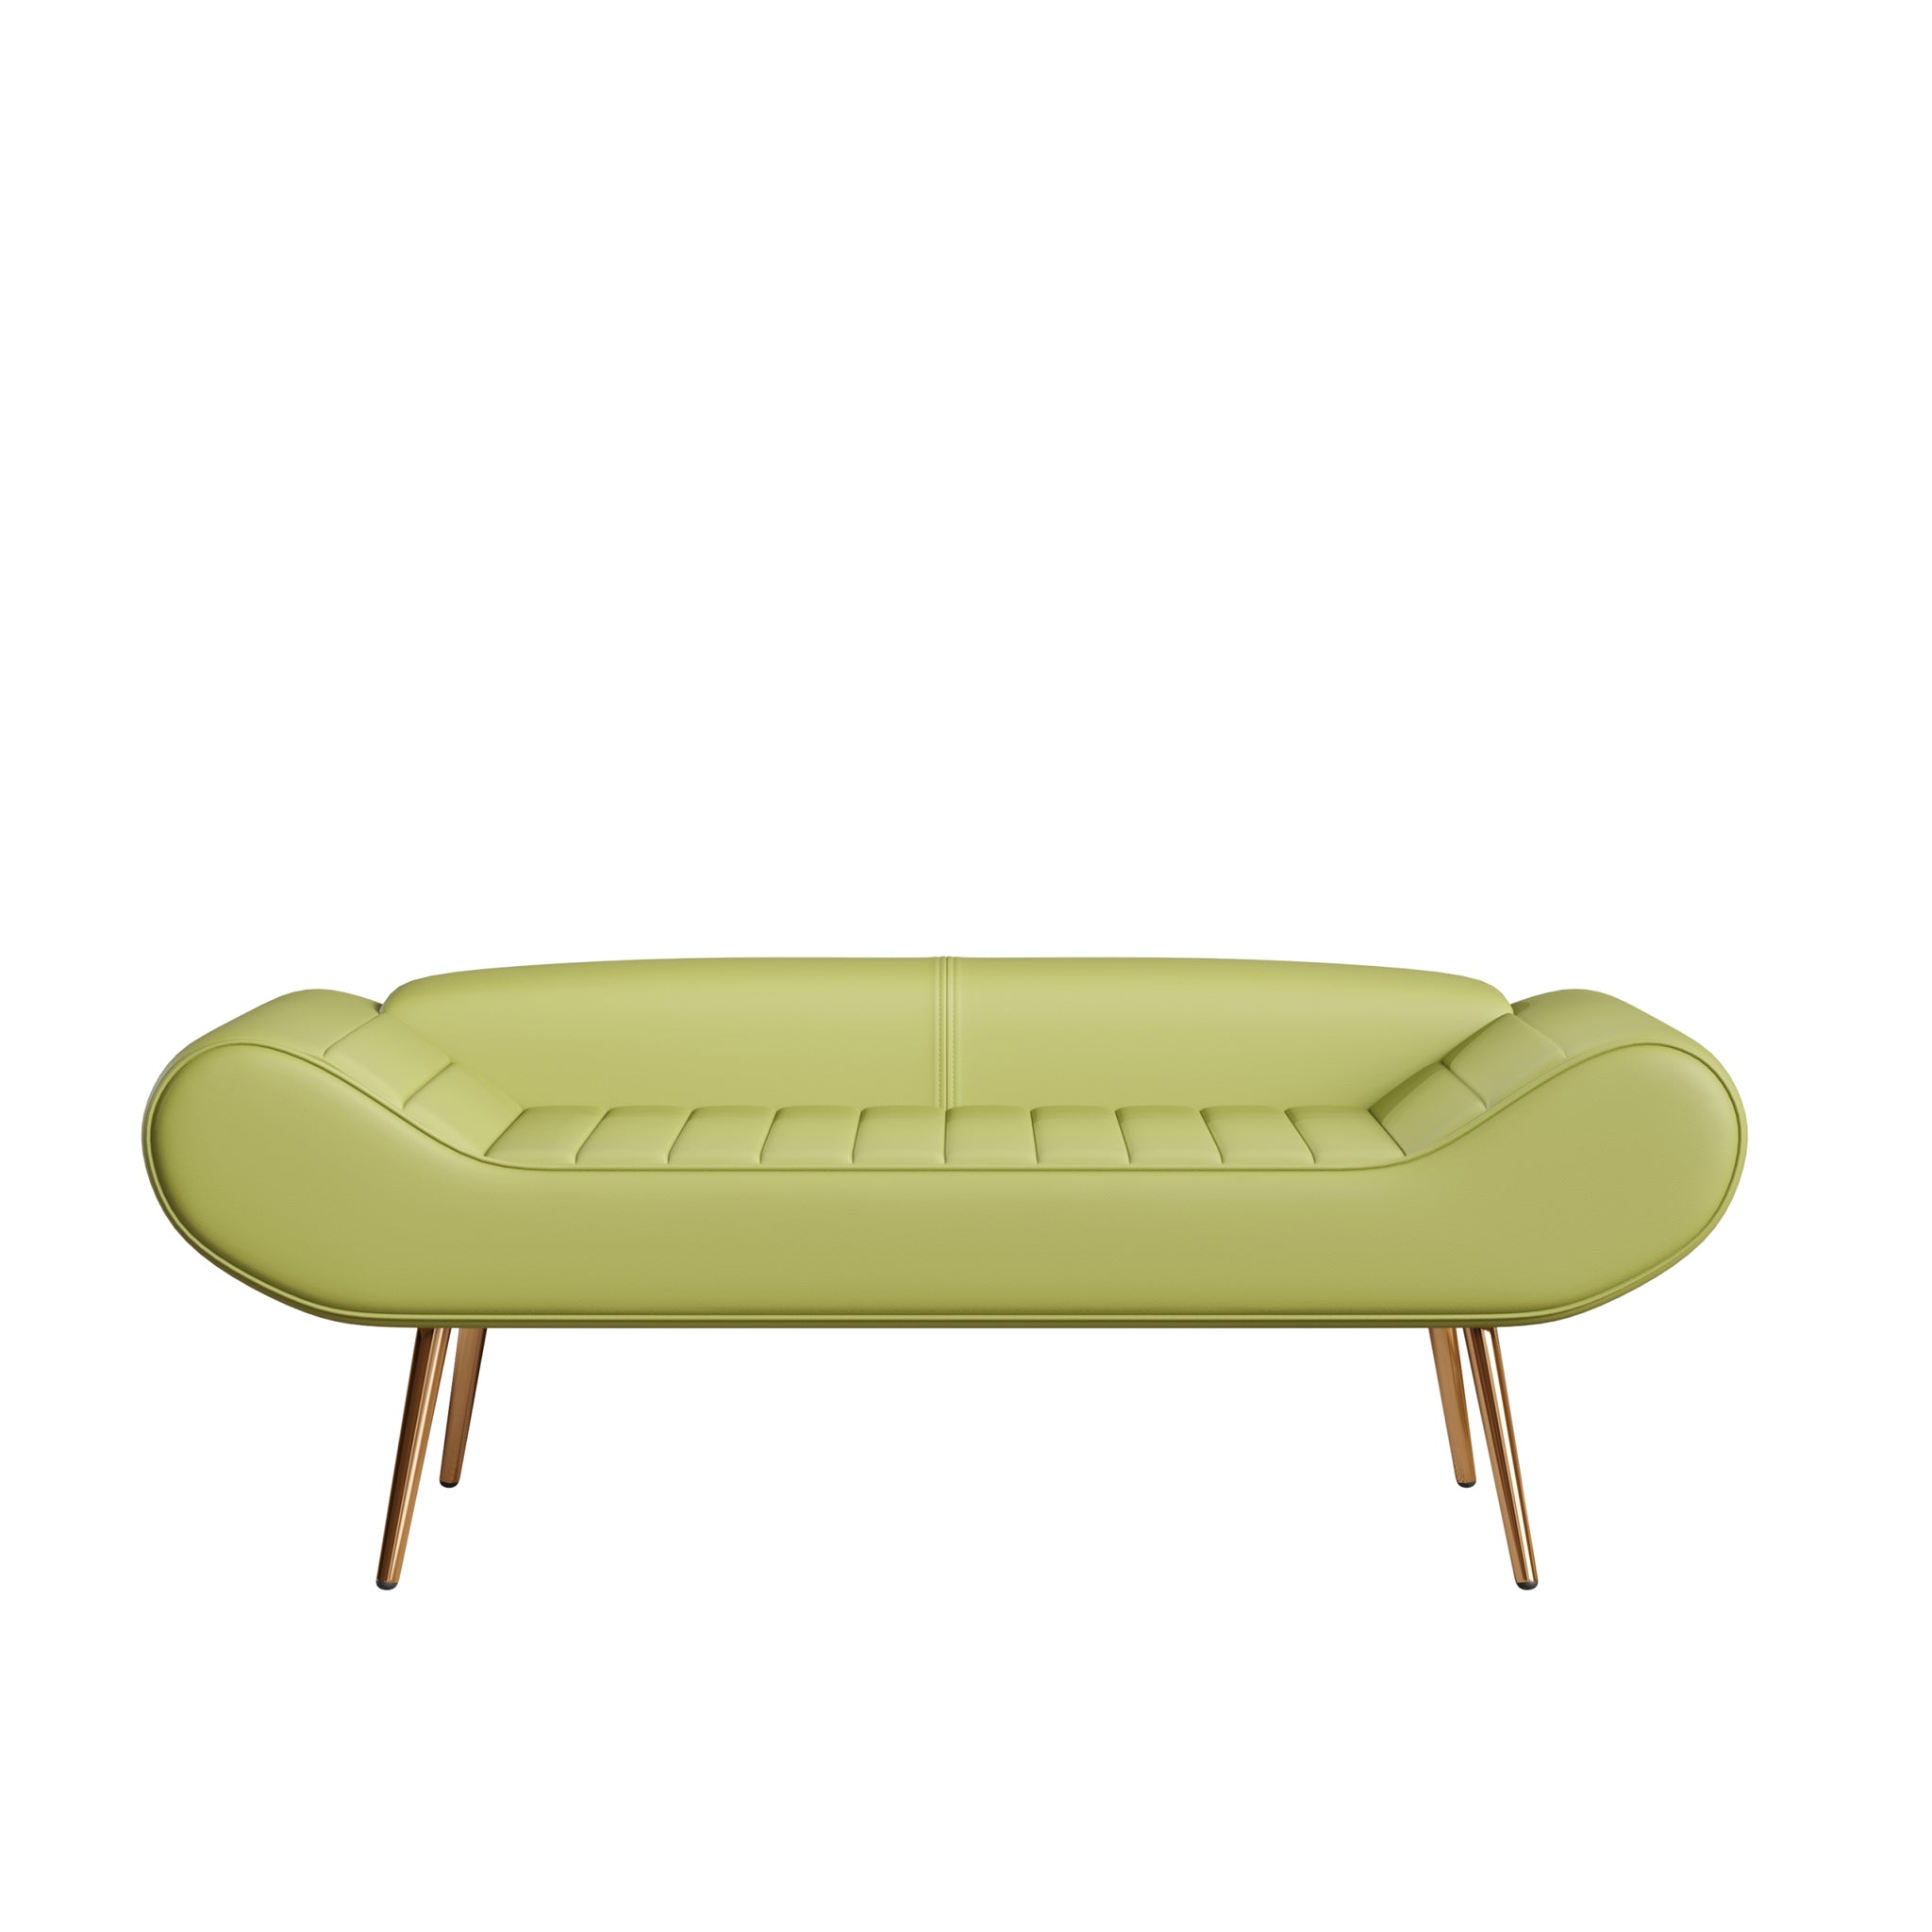 57 inch sofa stool PVC fabric can be placed in the bed green-polyester blend